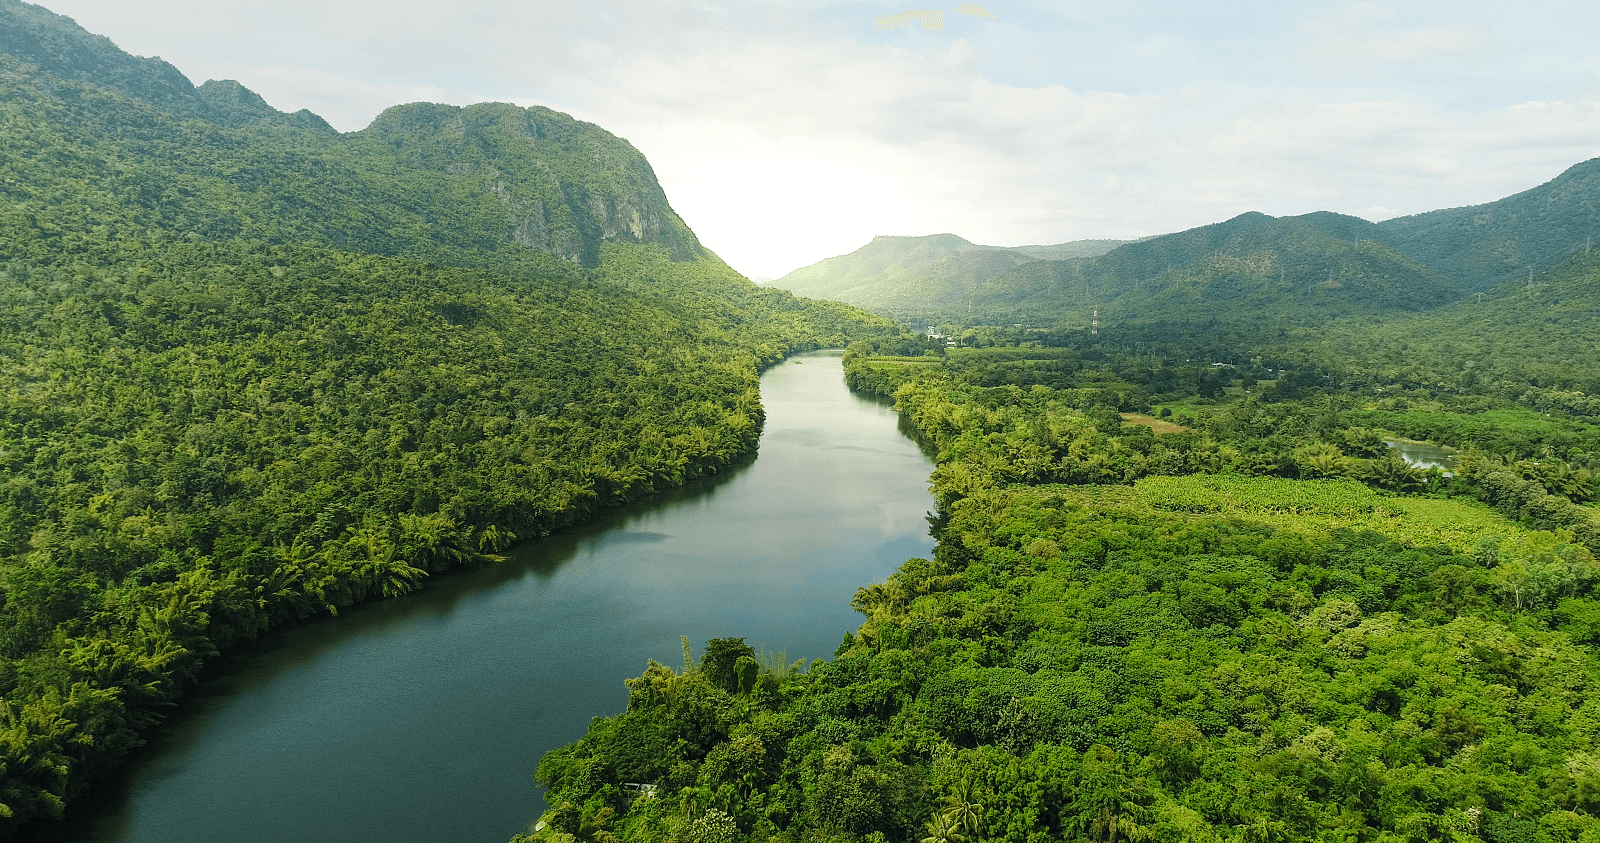 River in a forest with mountains in background